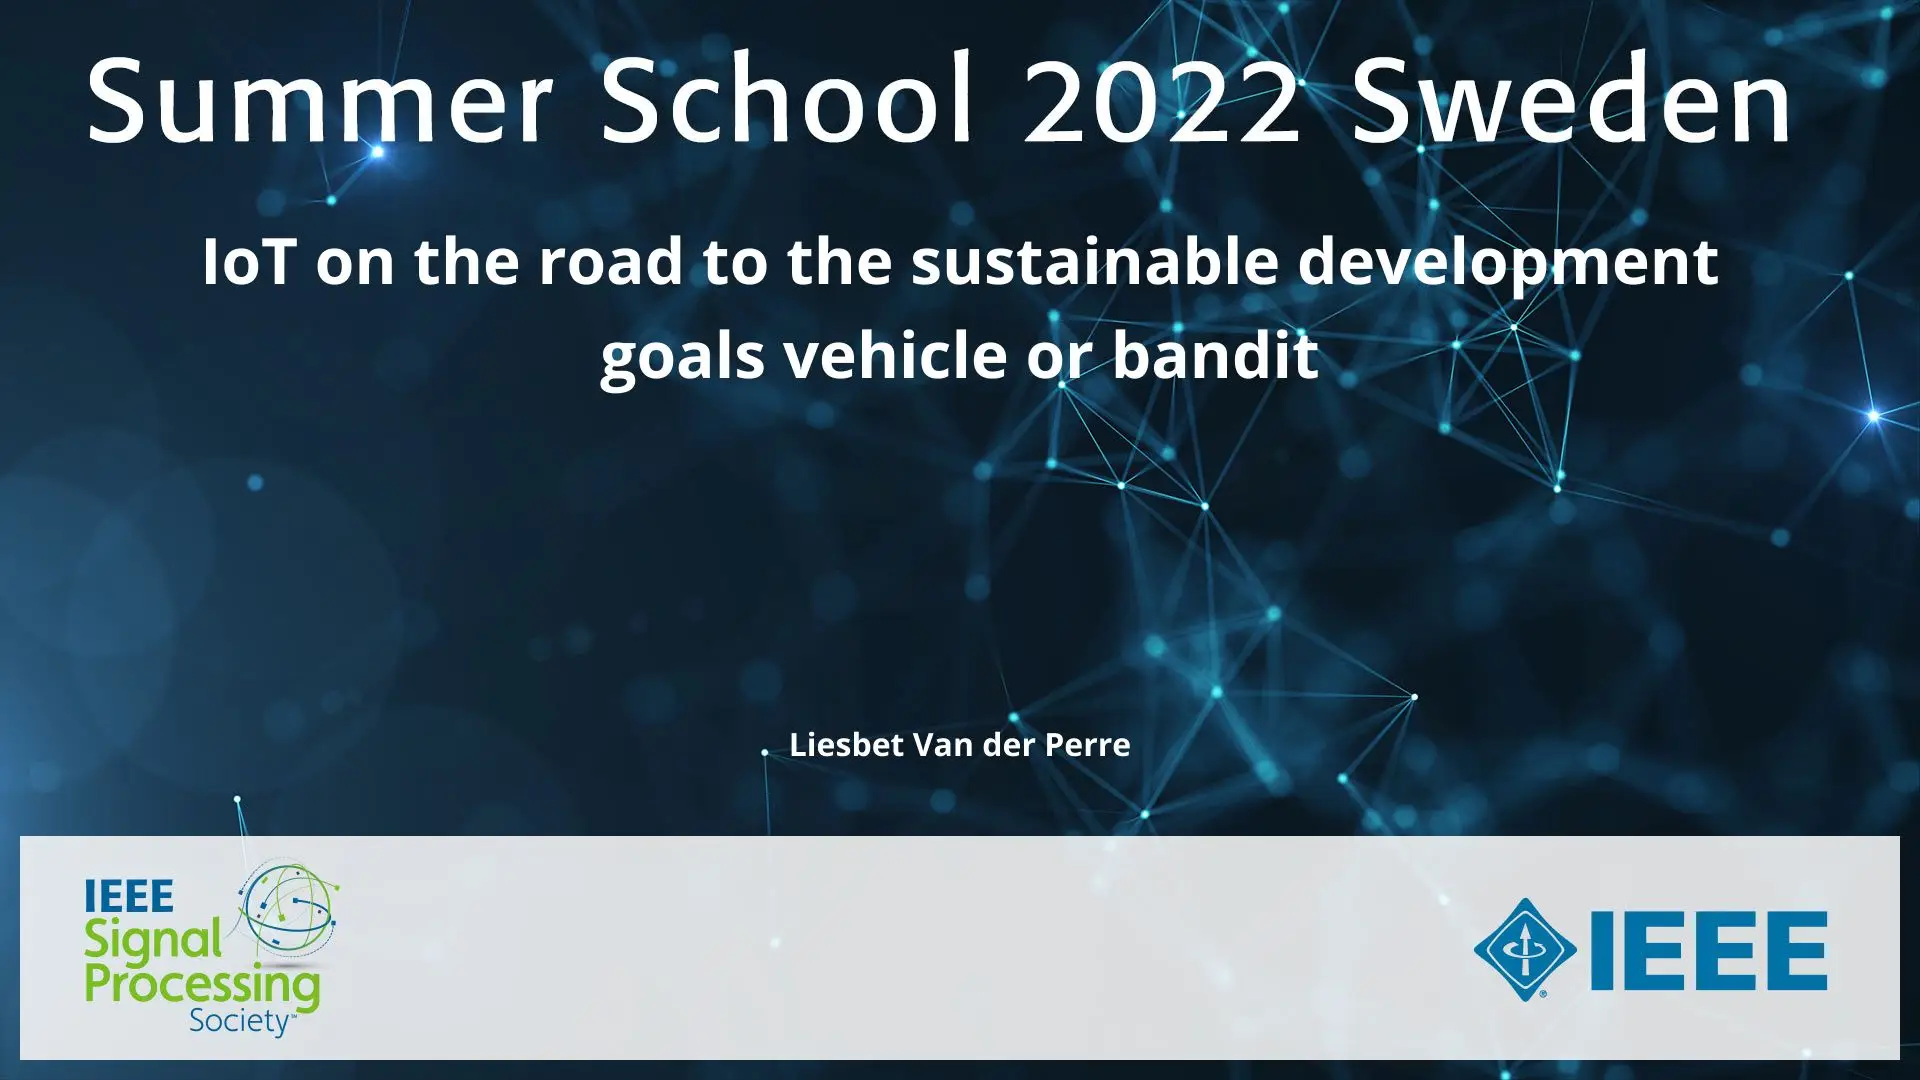 IoT on the road to the sustainable development goals vehicle or bandit